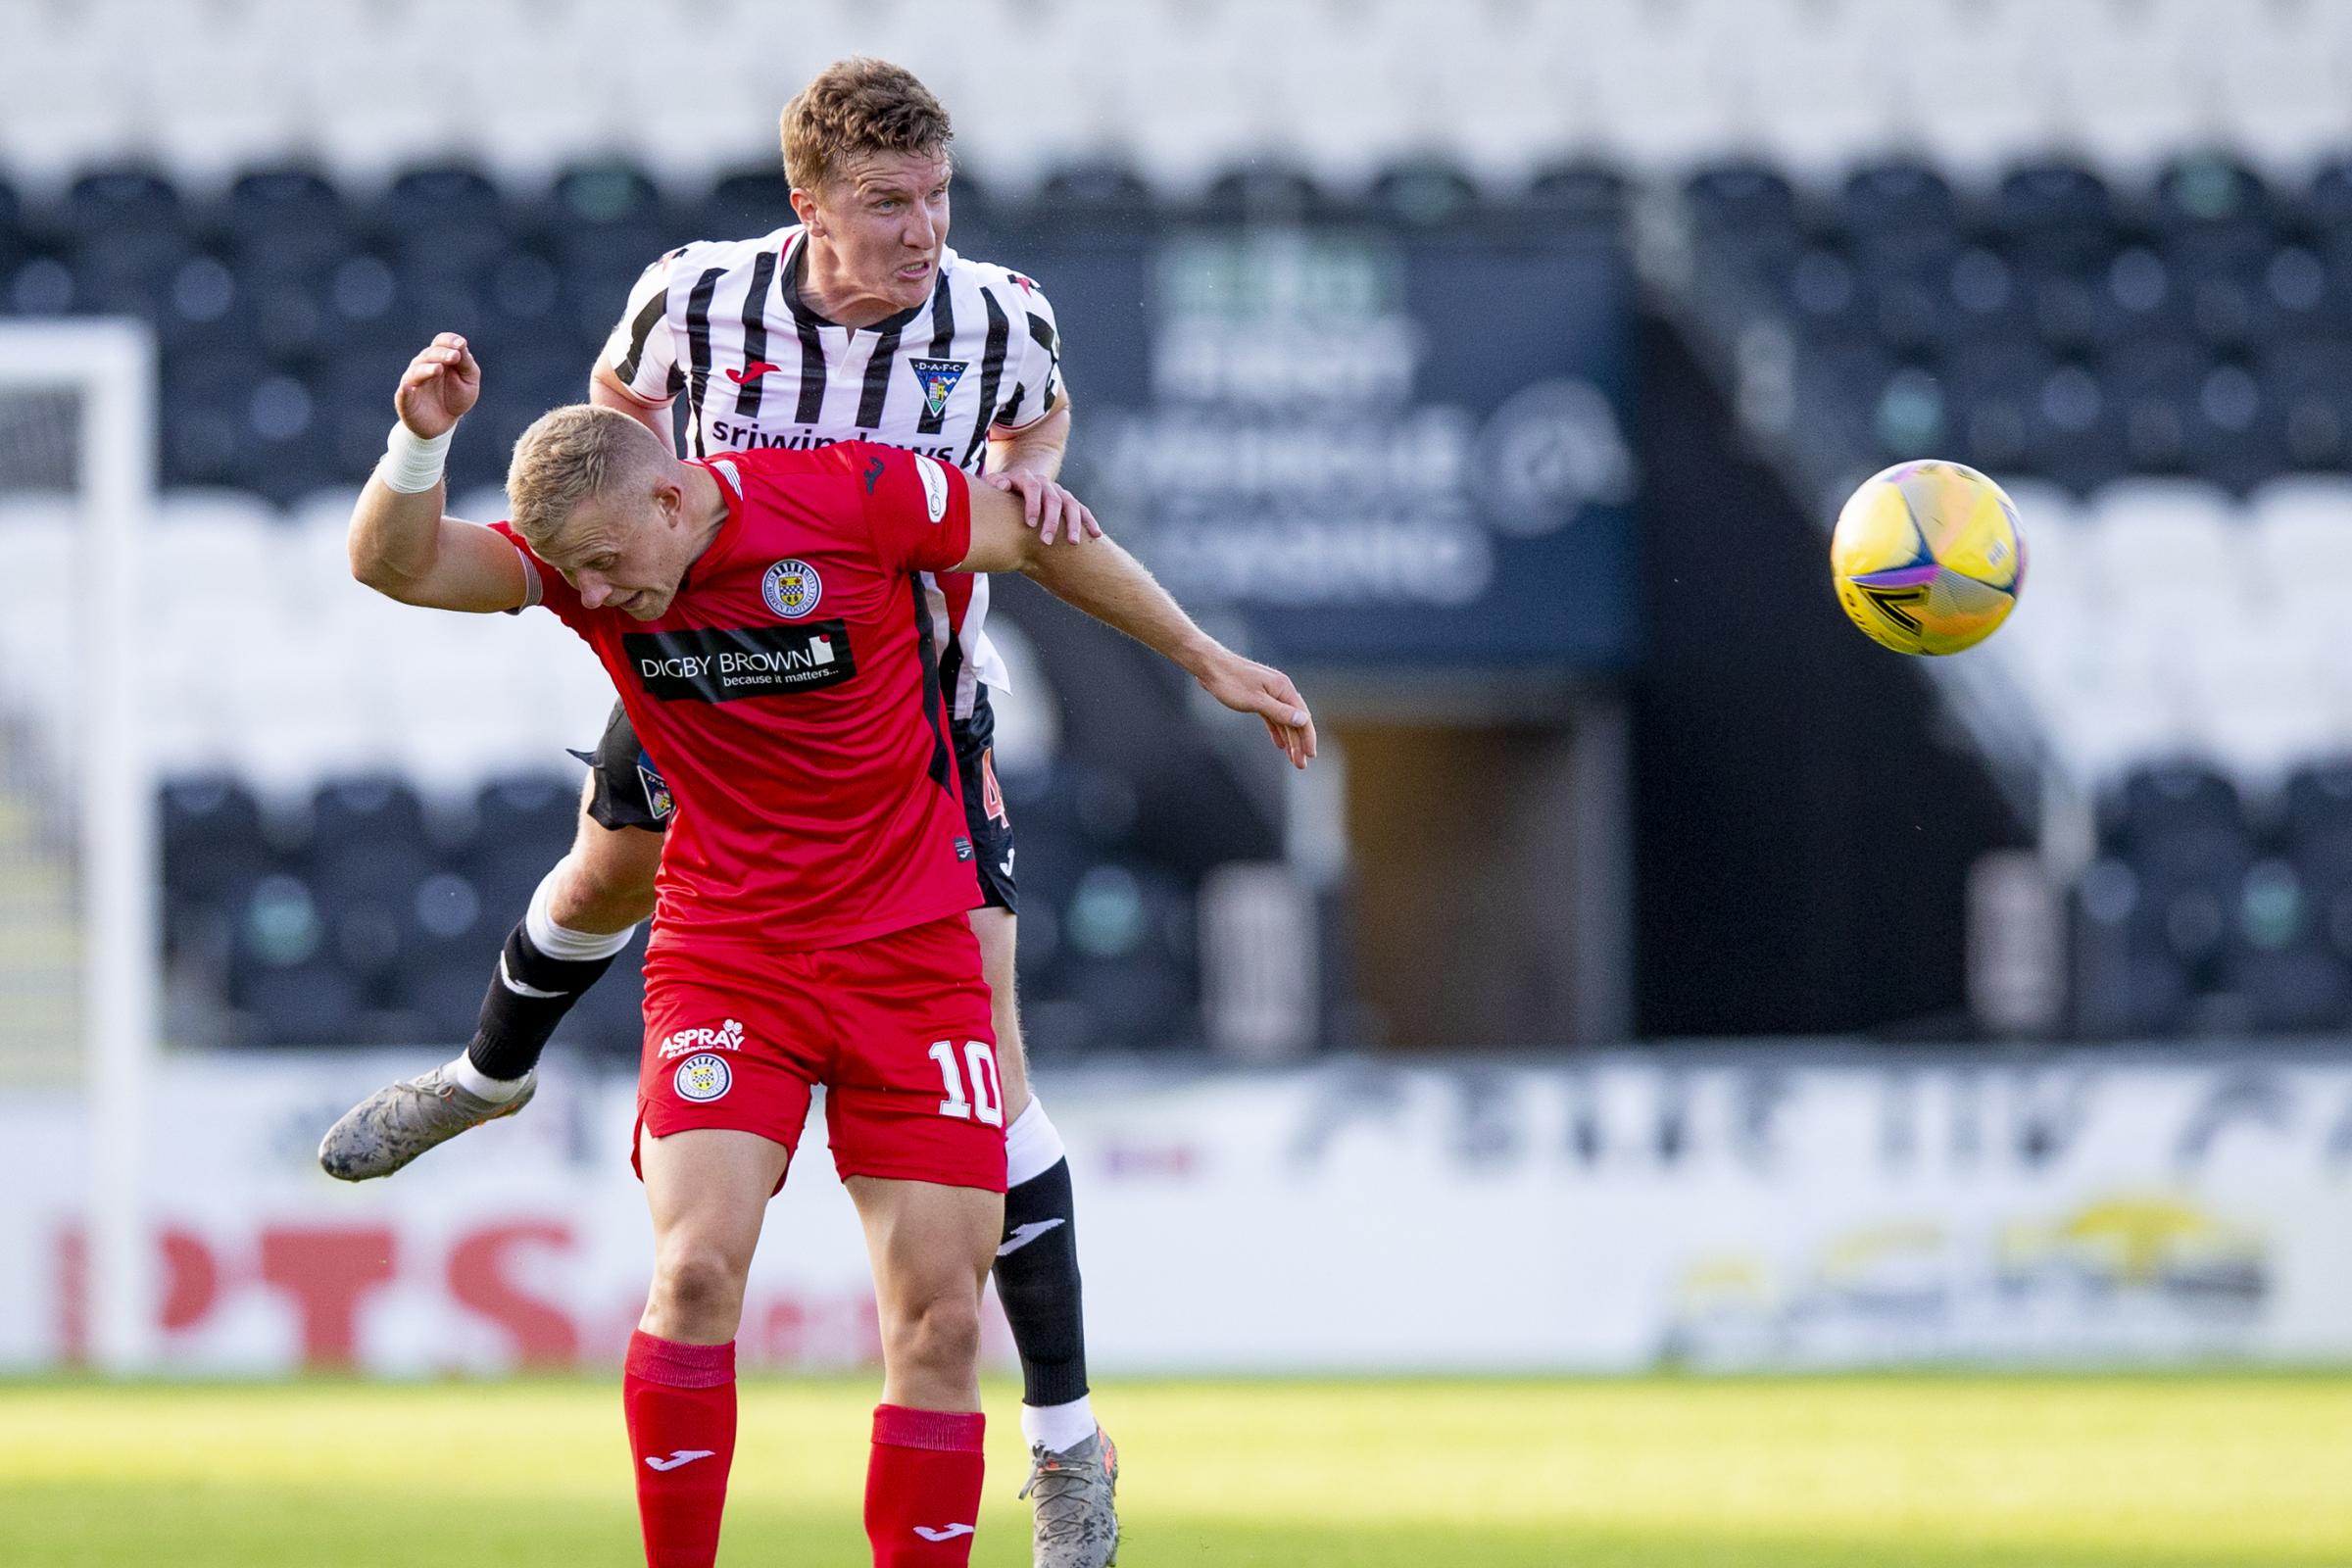 Dunfermline: Paul Watson contract terminated by 'mutual consent'